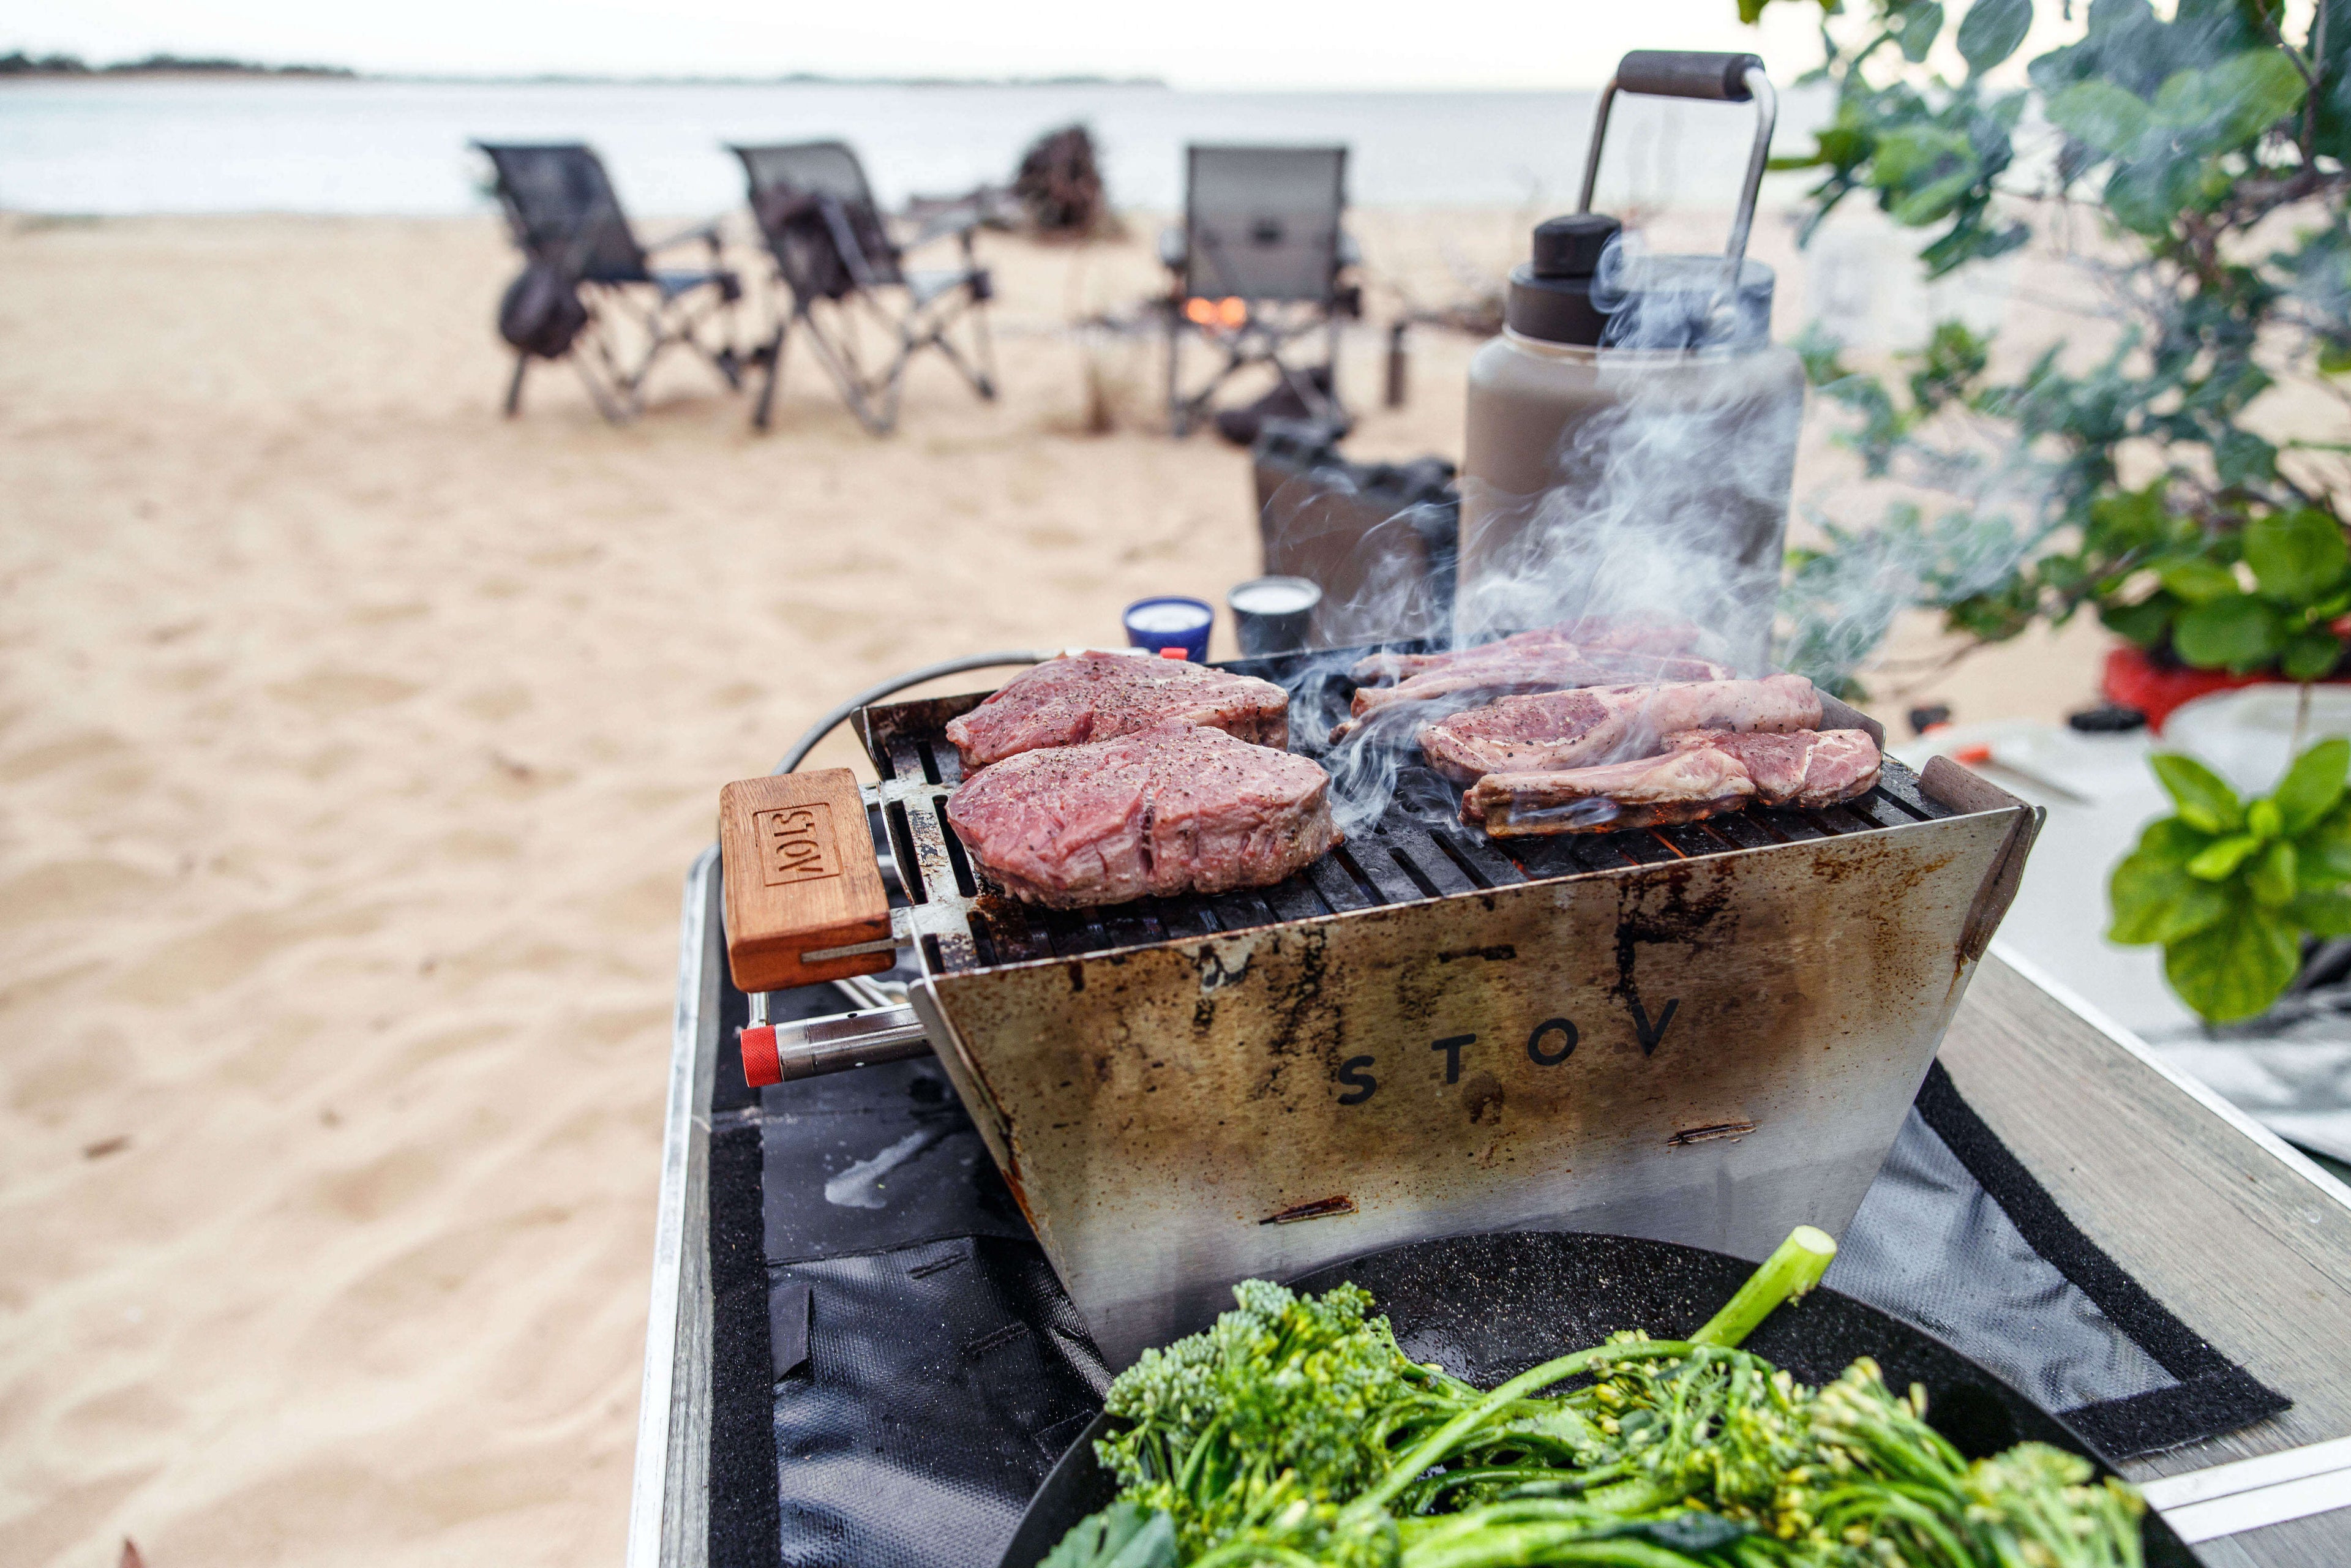 Unlike the weber baby and charcoal grills, the STOV BBQ is a portable bbq type that can be fired up in no time on any of our adventures